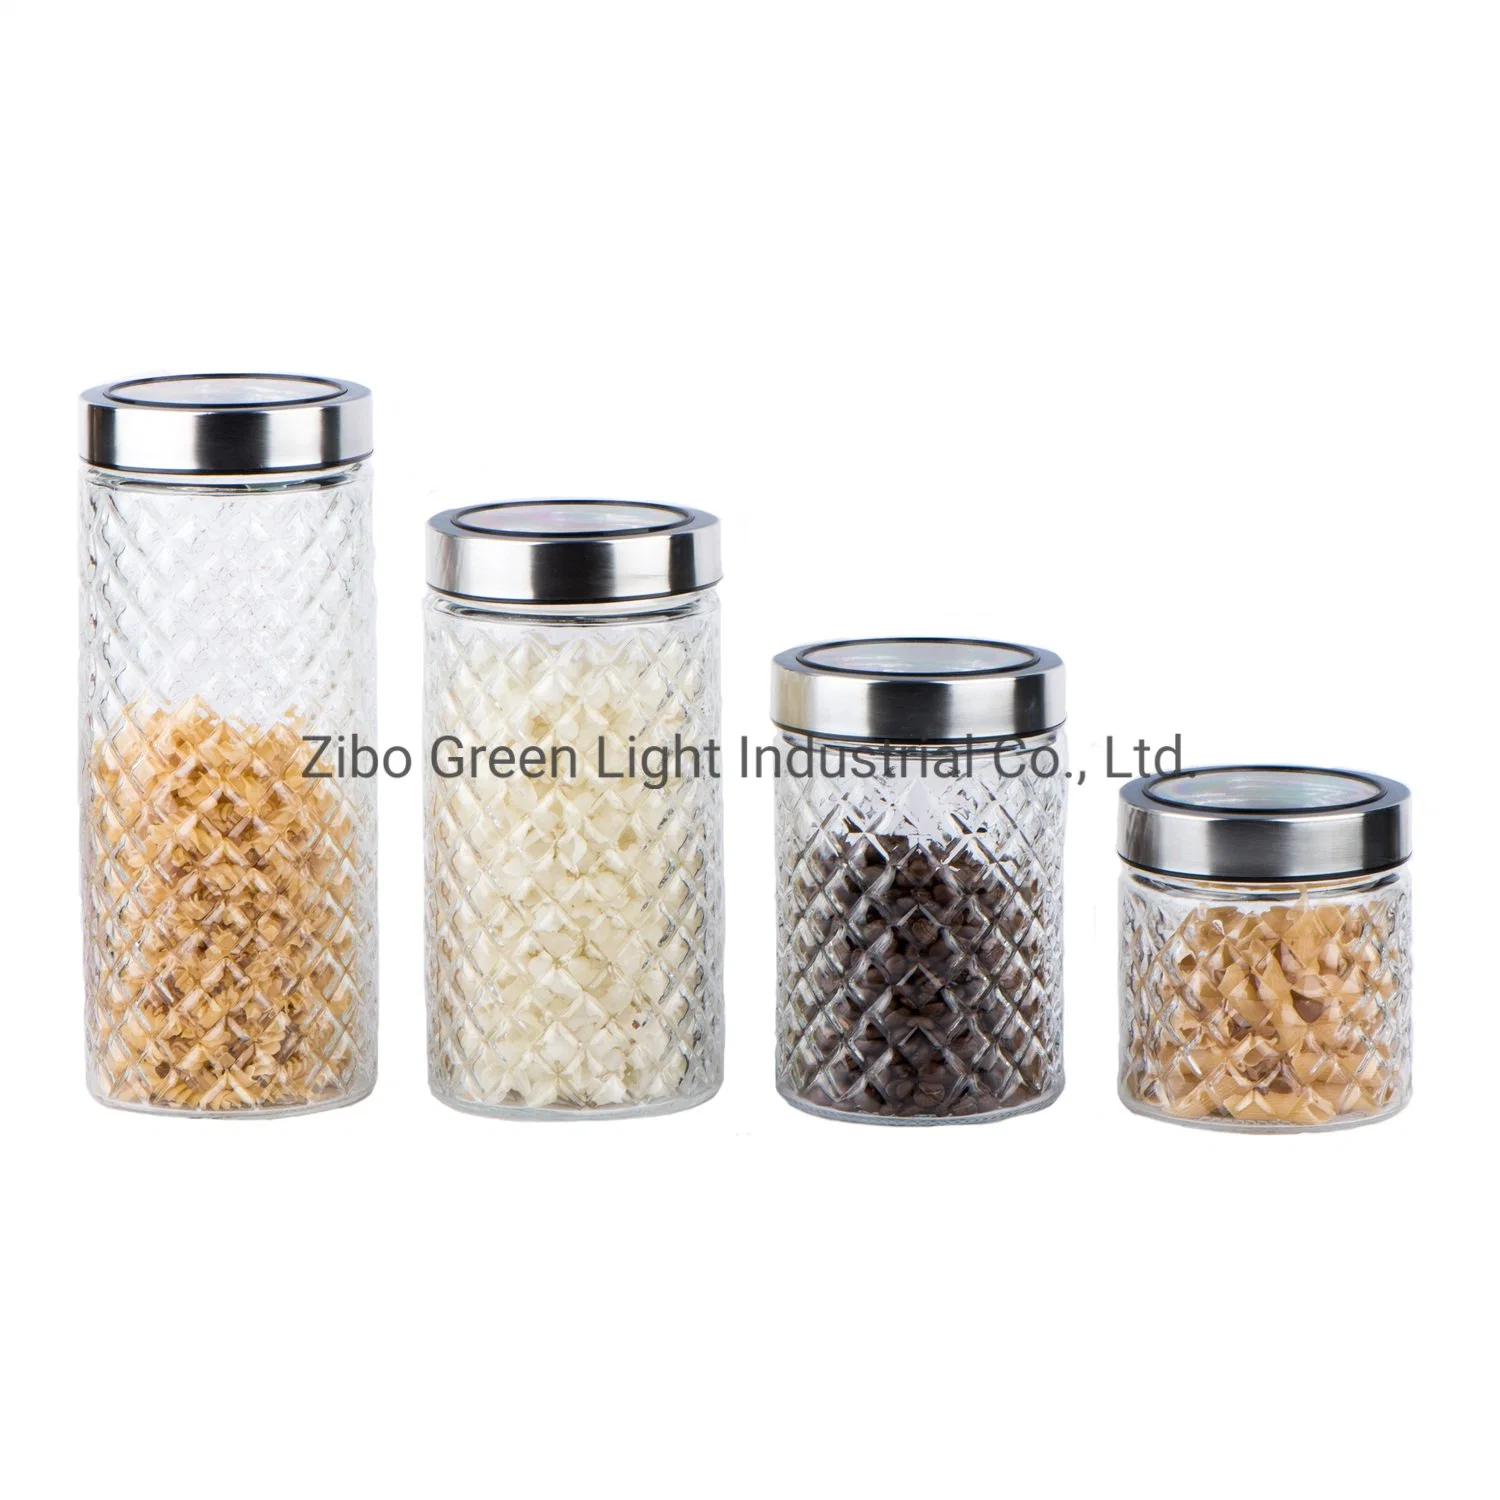 Big Mouth Embossed Design Glass Food Storage Jar with Stainless Steel Lid